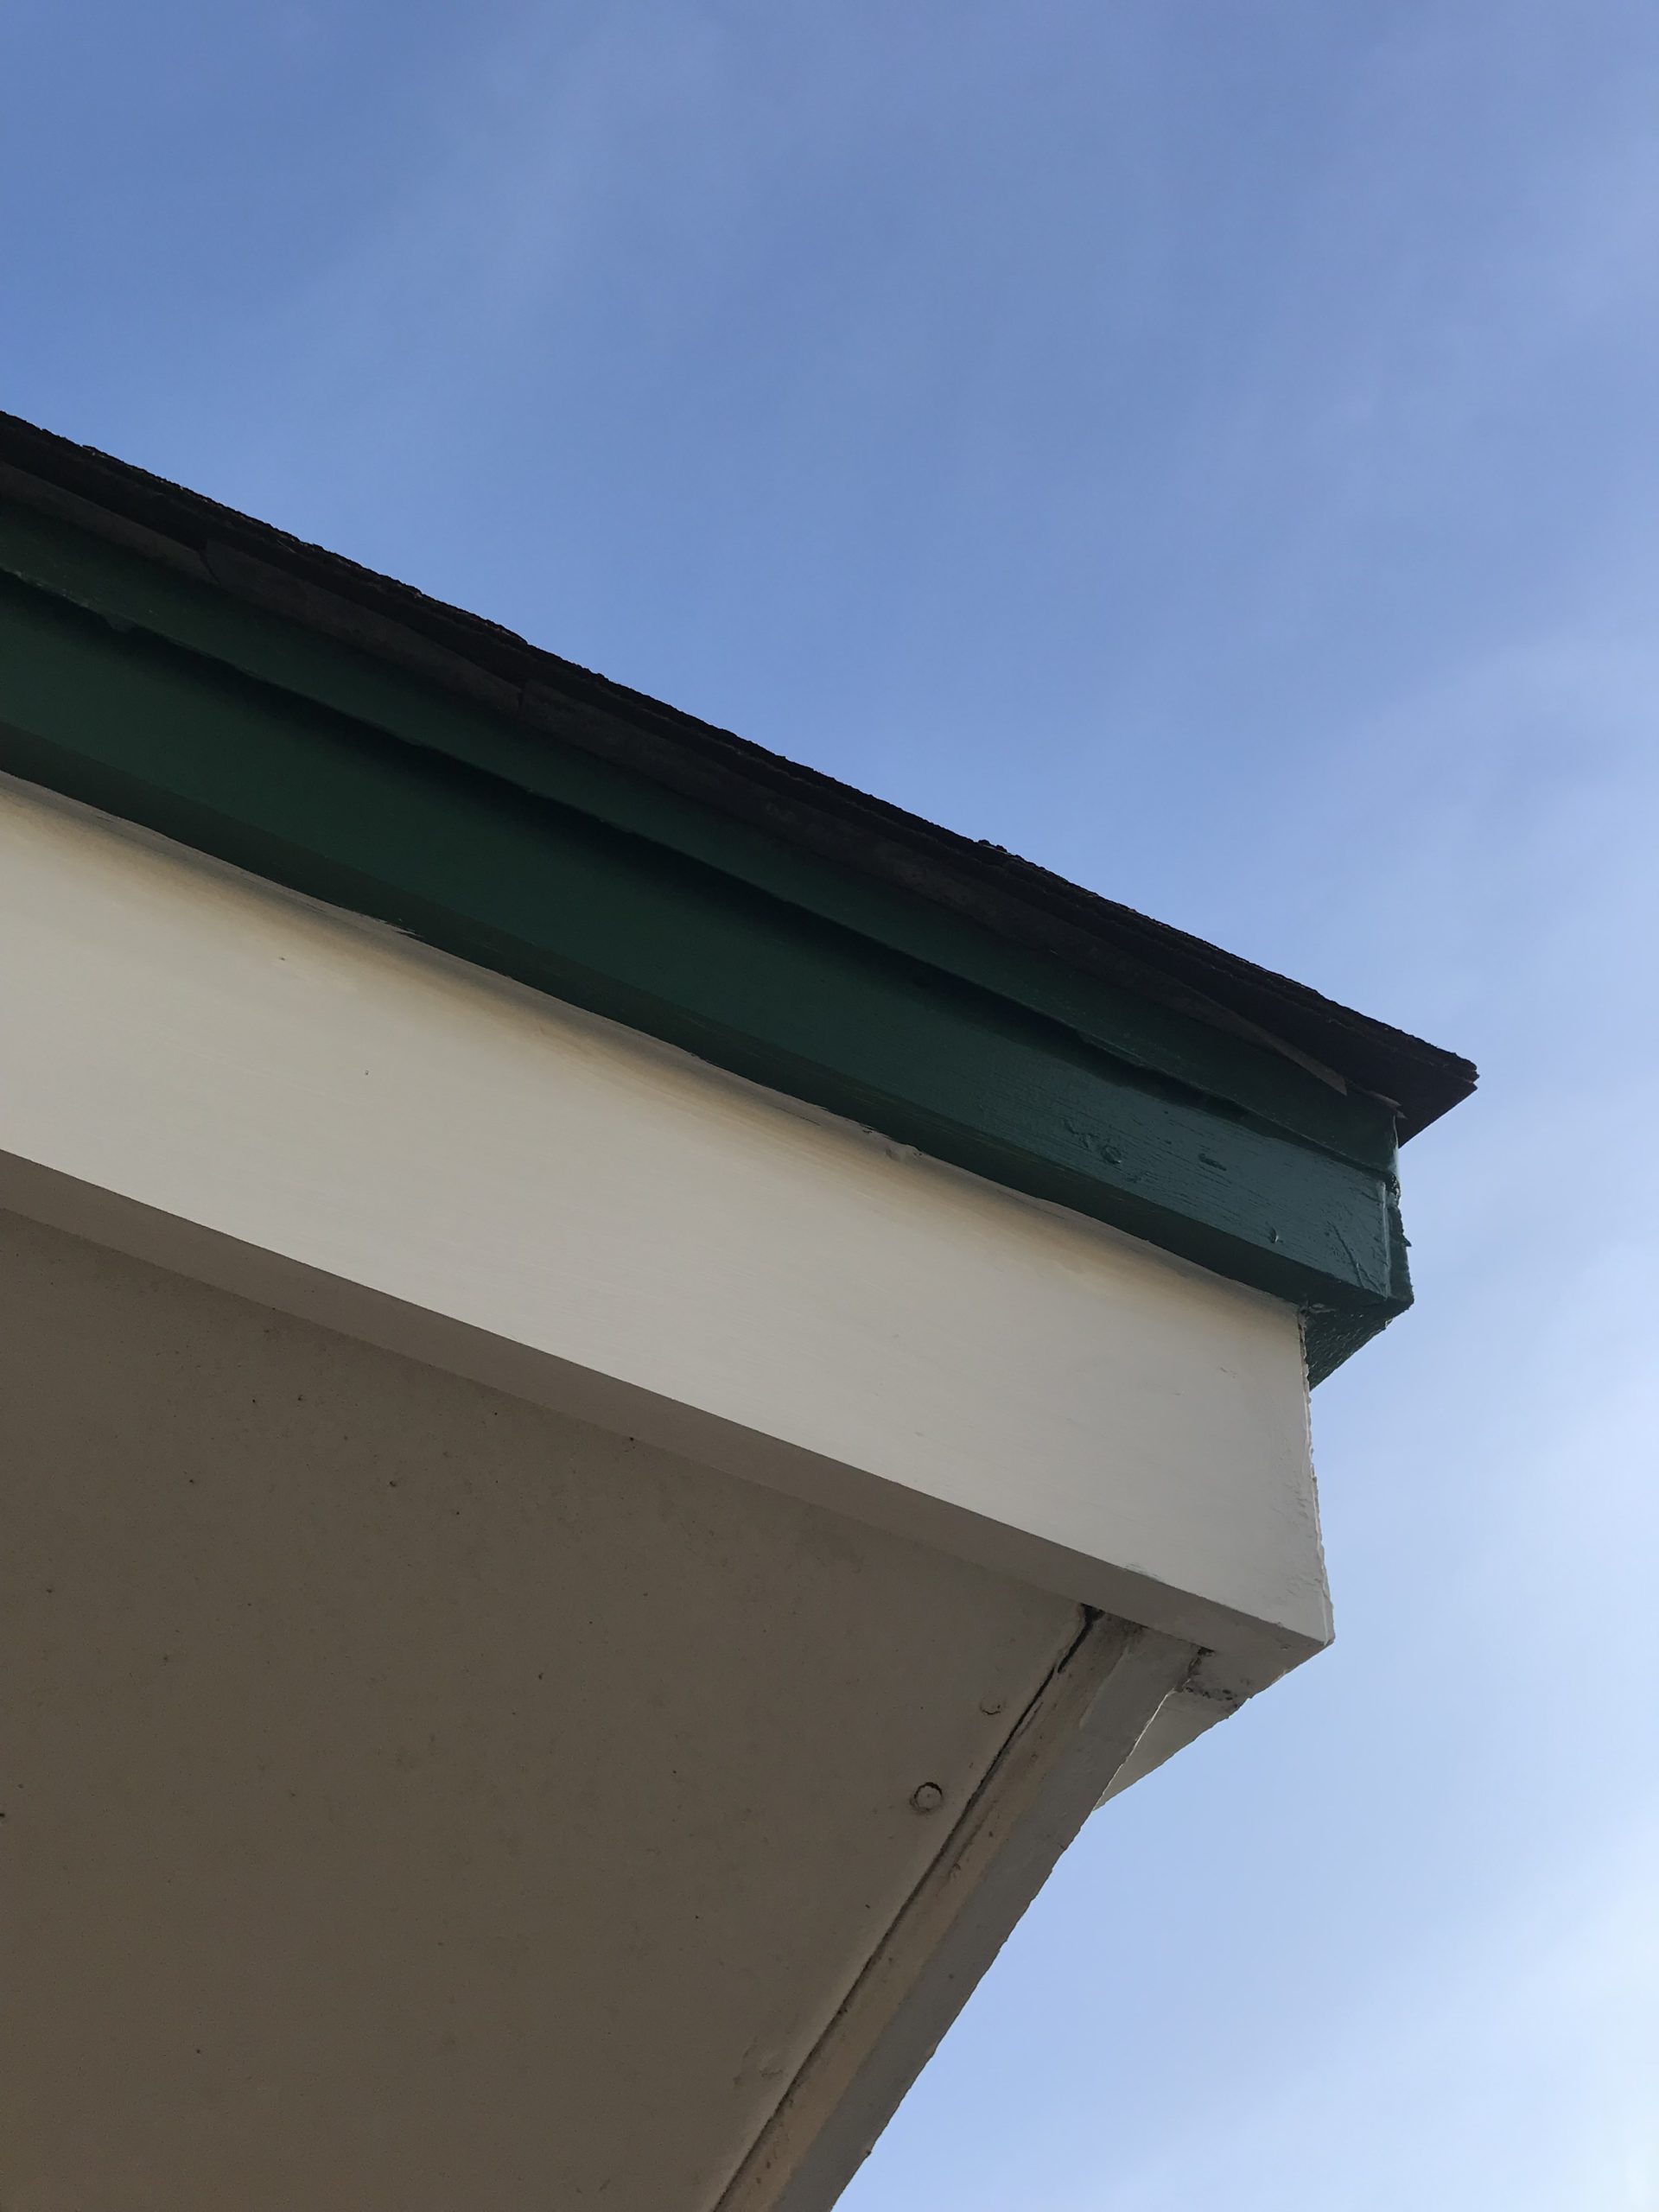 Repaired fascia damage on the side of a home underneath the roof in Arlington, TX.